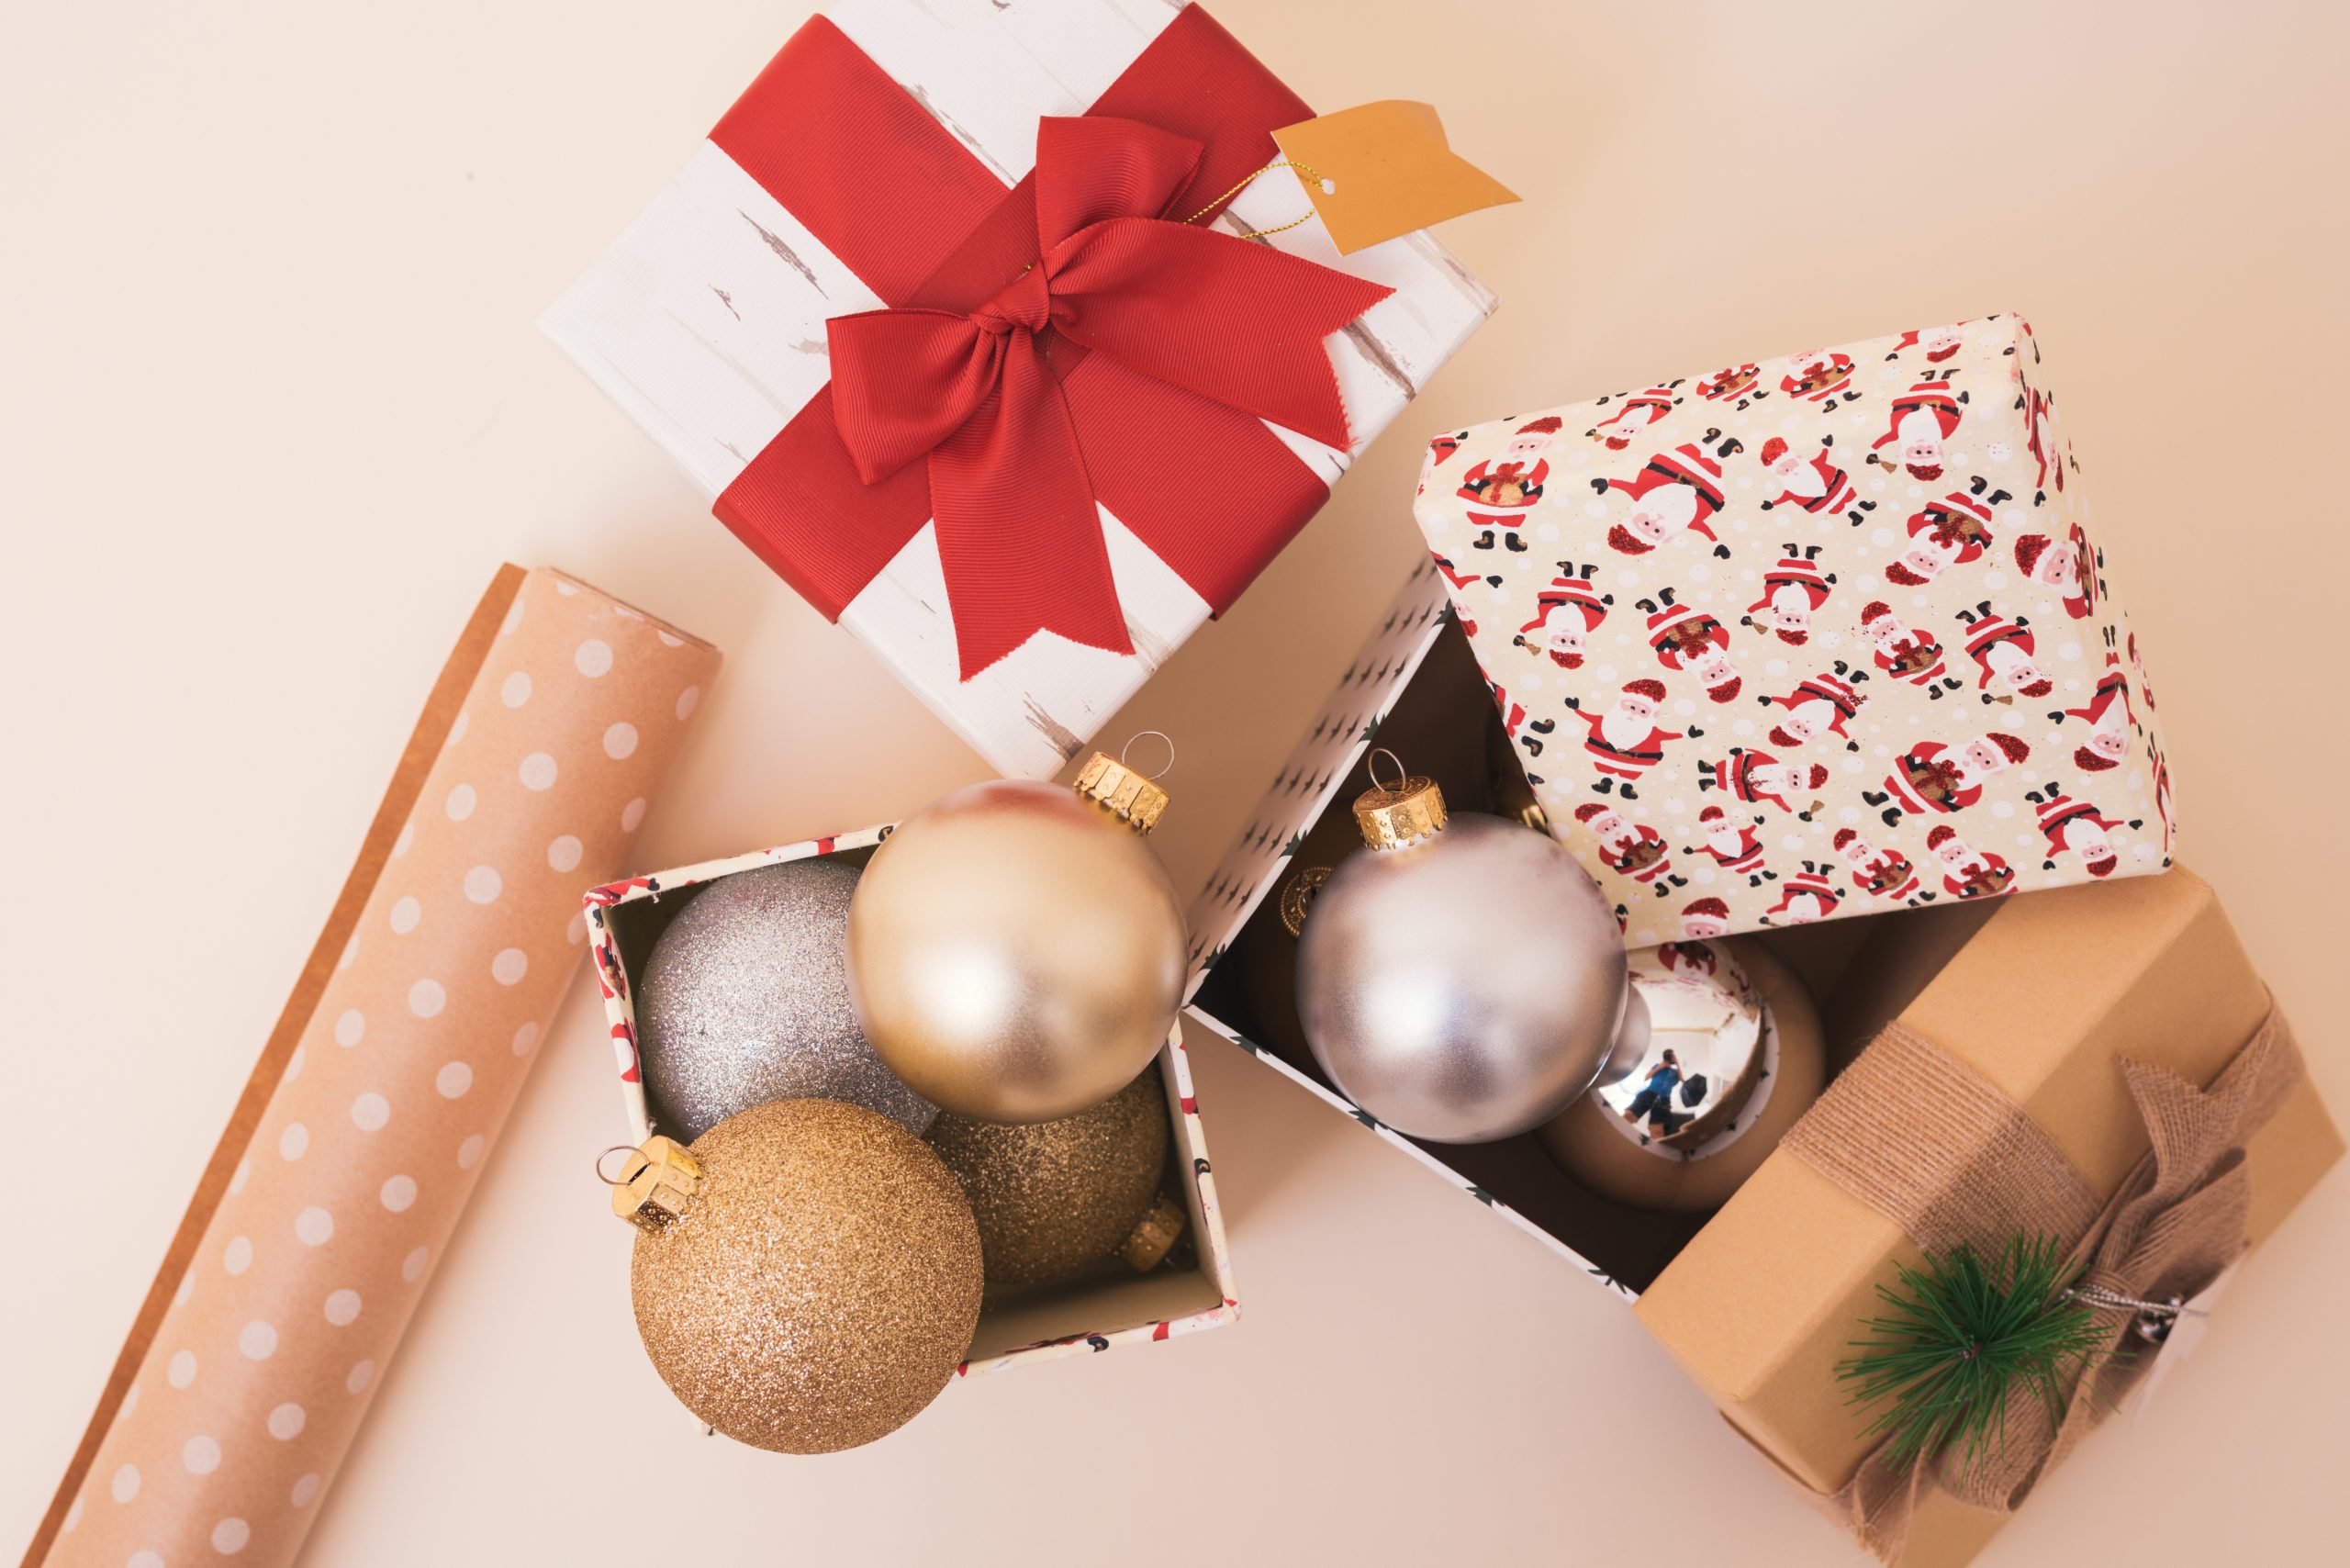 Ornaments in present boxes